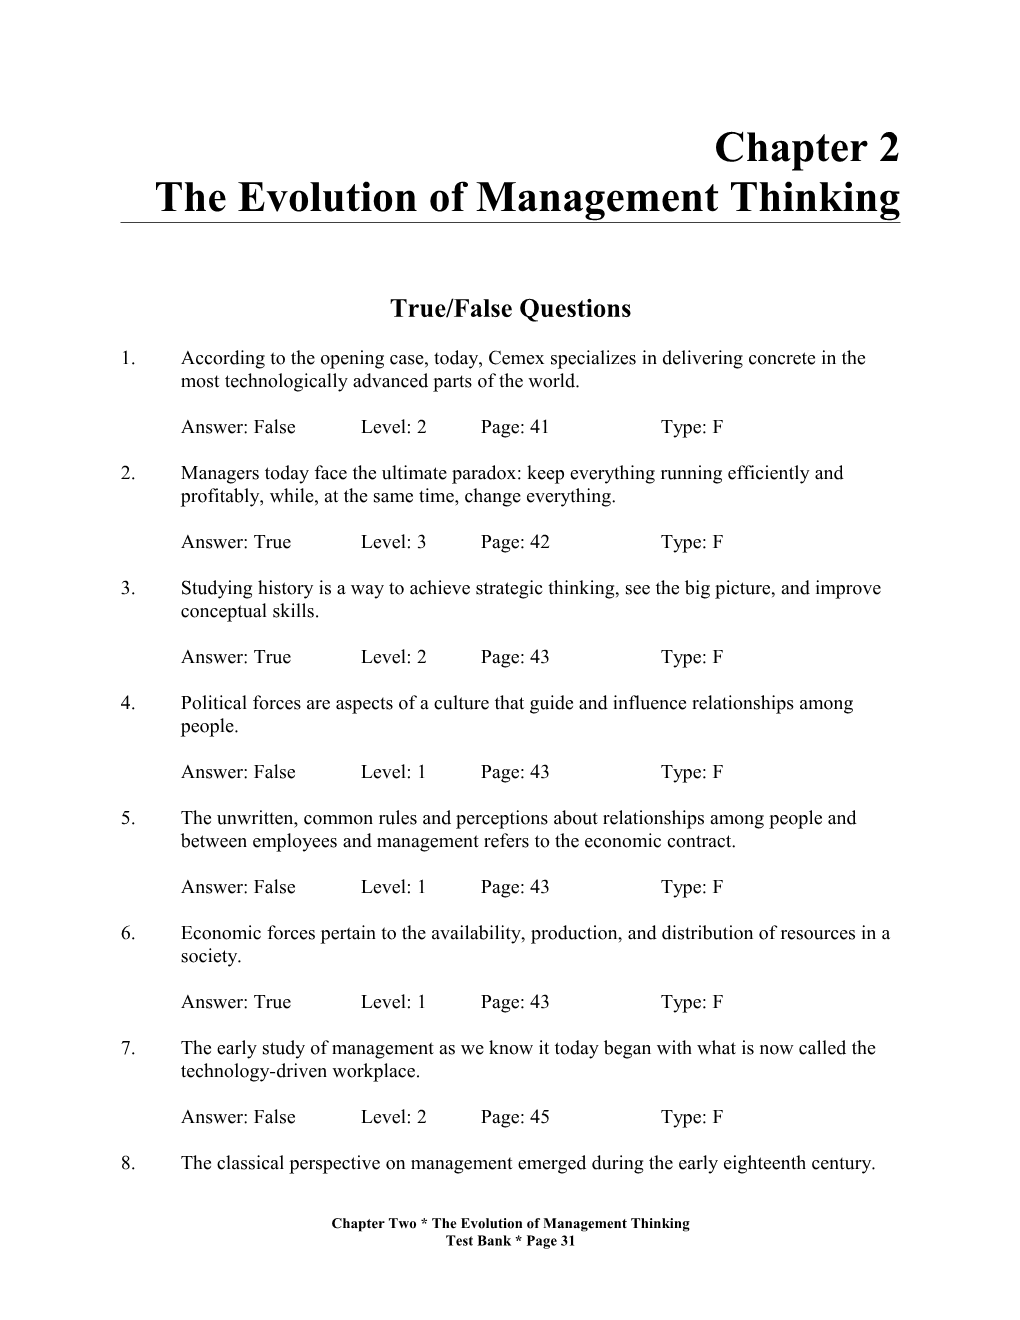 The Evolution of Management Thinking